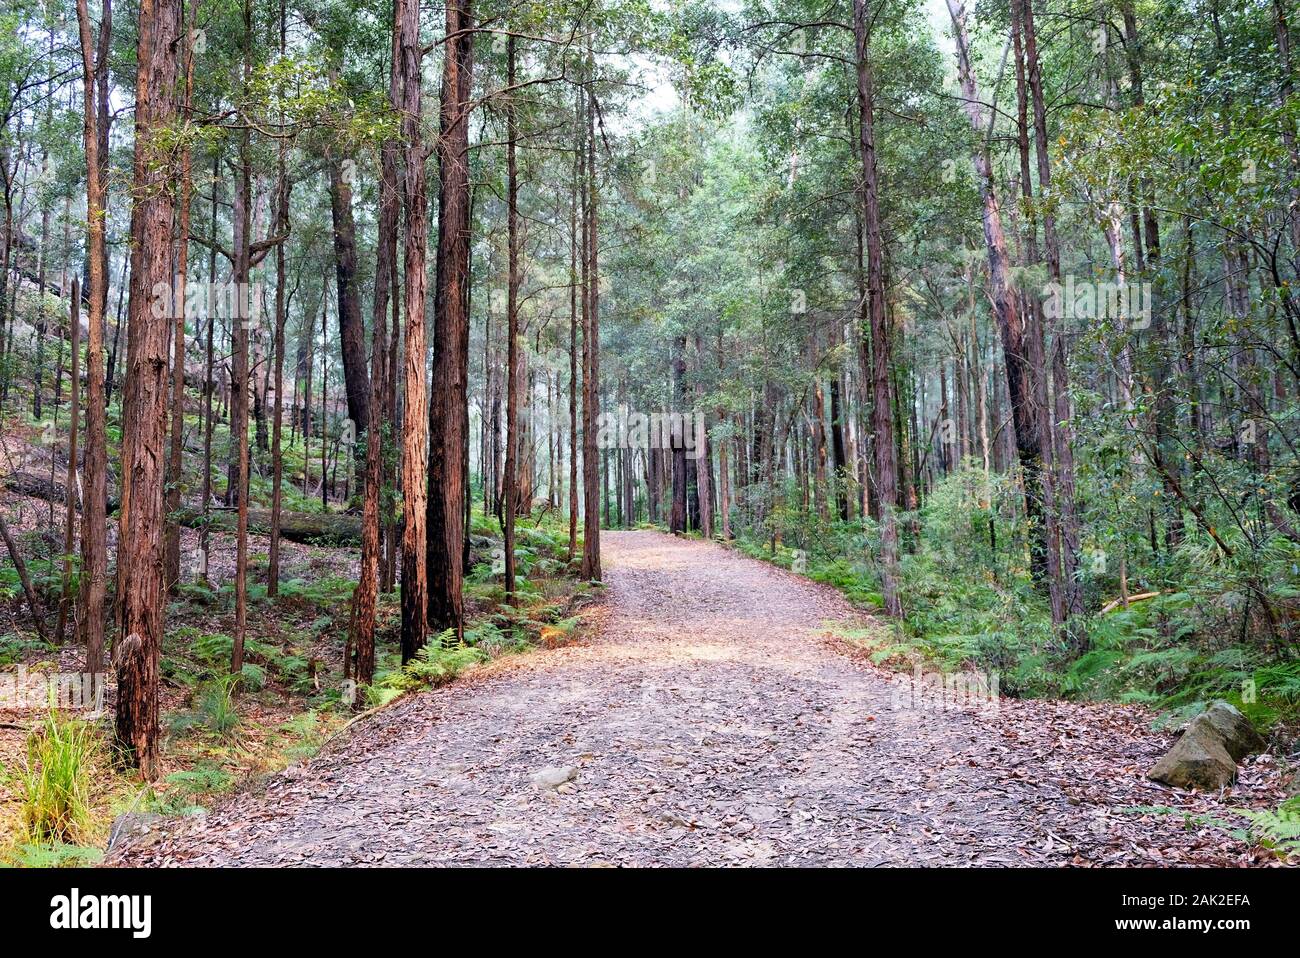 Bush walk and a walking track in wild forest in Berowra National Park, Australia Stock Photo